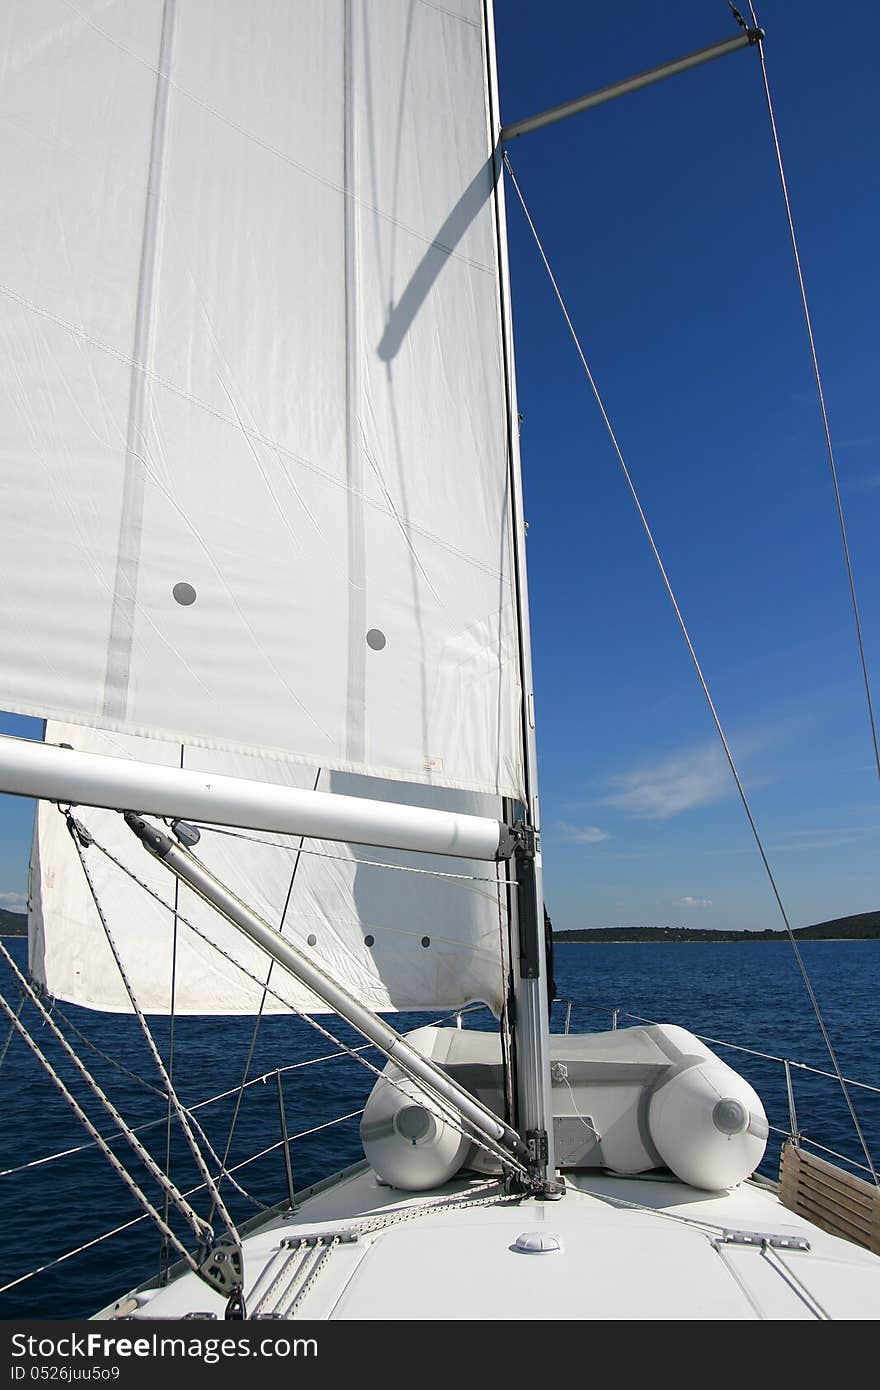 Yachting equipment, sails and sea-travel. Yachting equipment, sails and sea-travel